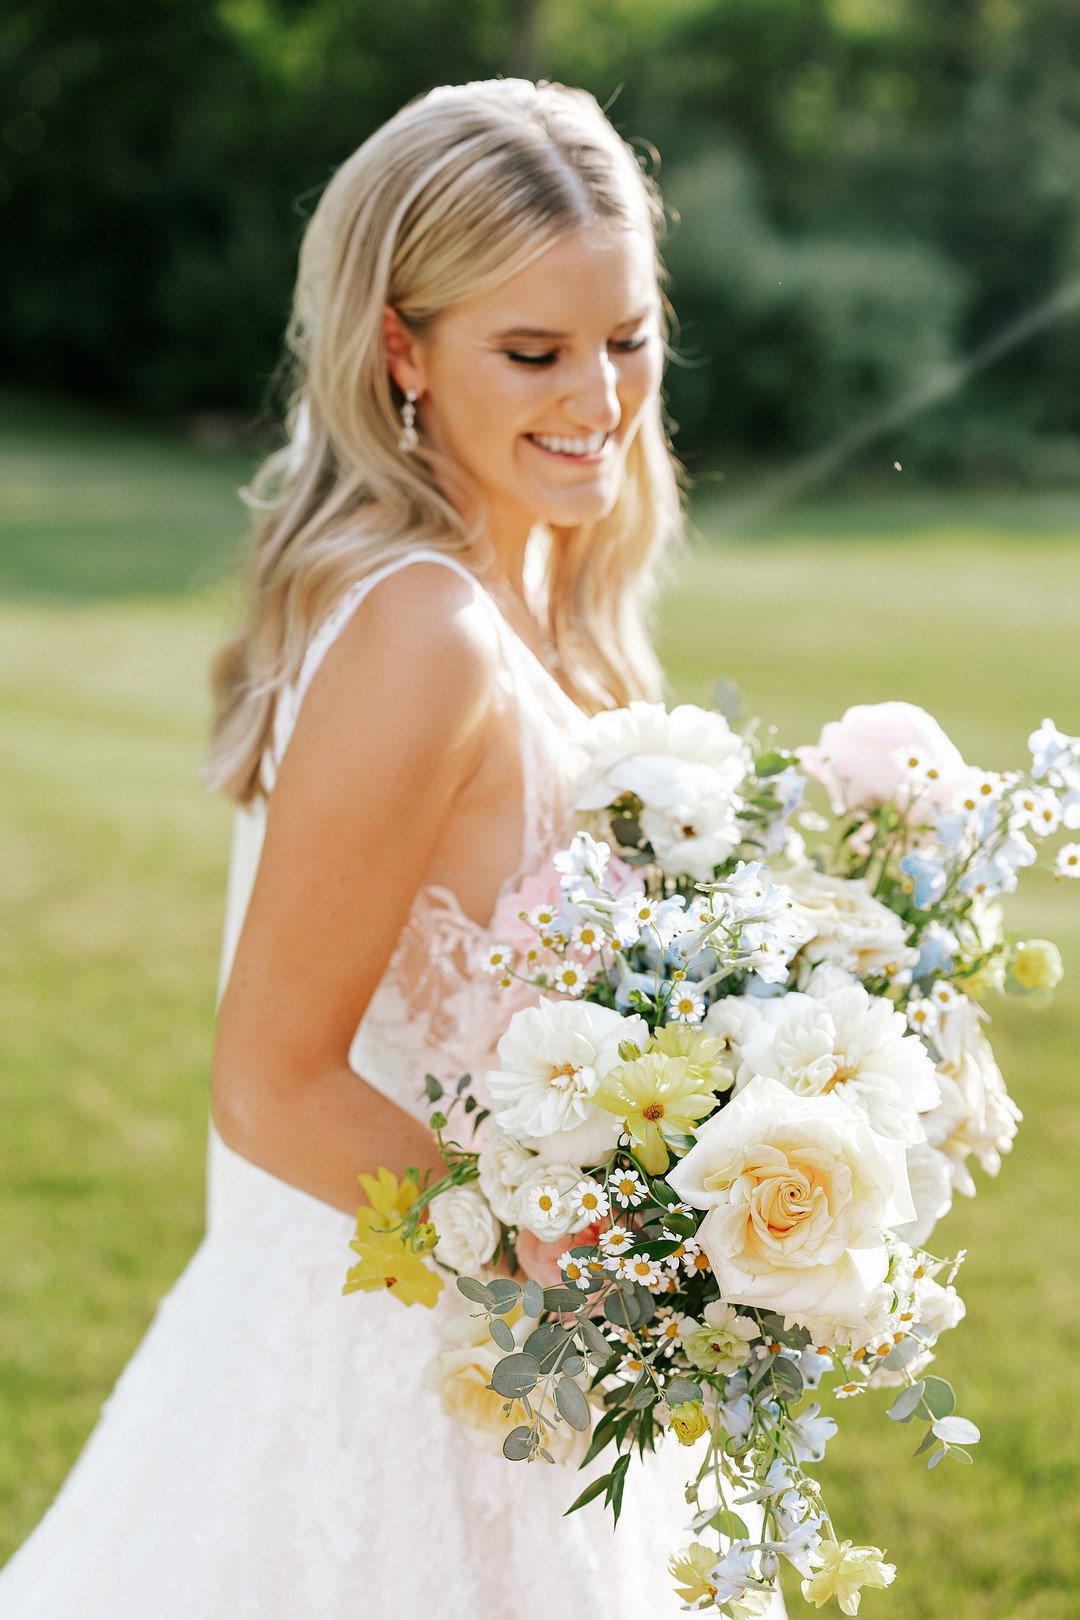 Cape Cod Inspired Backyard Wedding Styled Shoot_Tyrie Mehaffey Photography_July 31 Preview Tyrie Mehaffey Photography-13_low.jpg